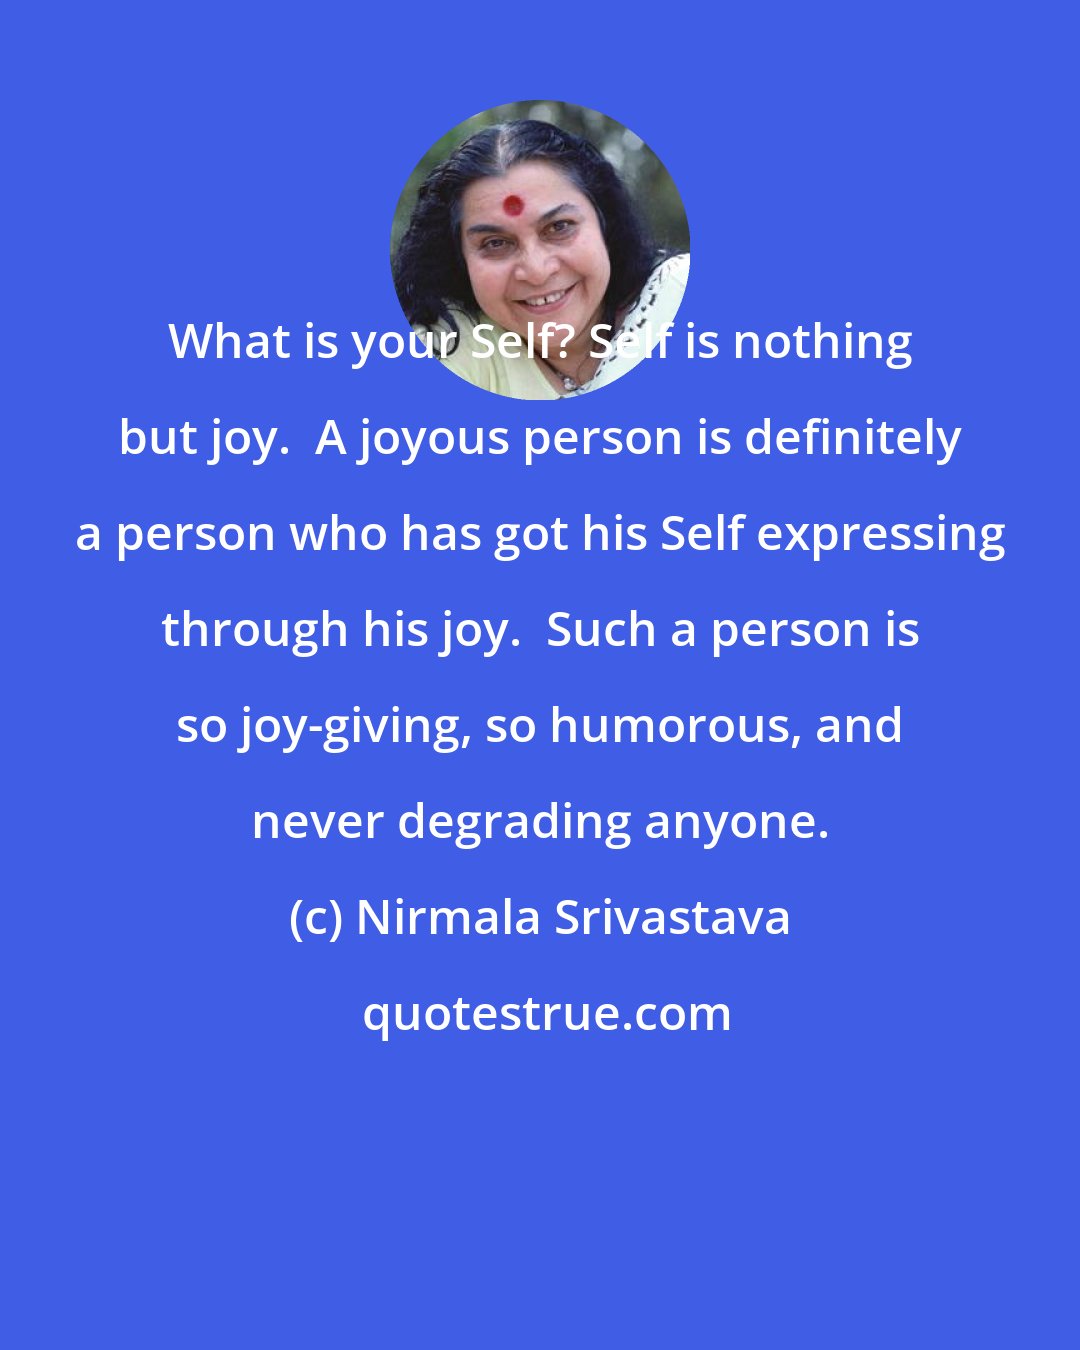 Nirmala Srivastava: What is your Self? Self is nothing but joy.  A joyous person is definitely a person who has got his Self expressing through his joy.  Such a person is so joy-giving, so humorous, and never degrading anyone.